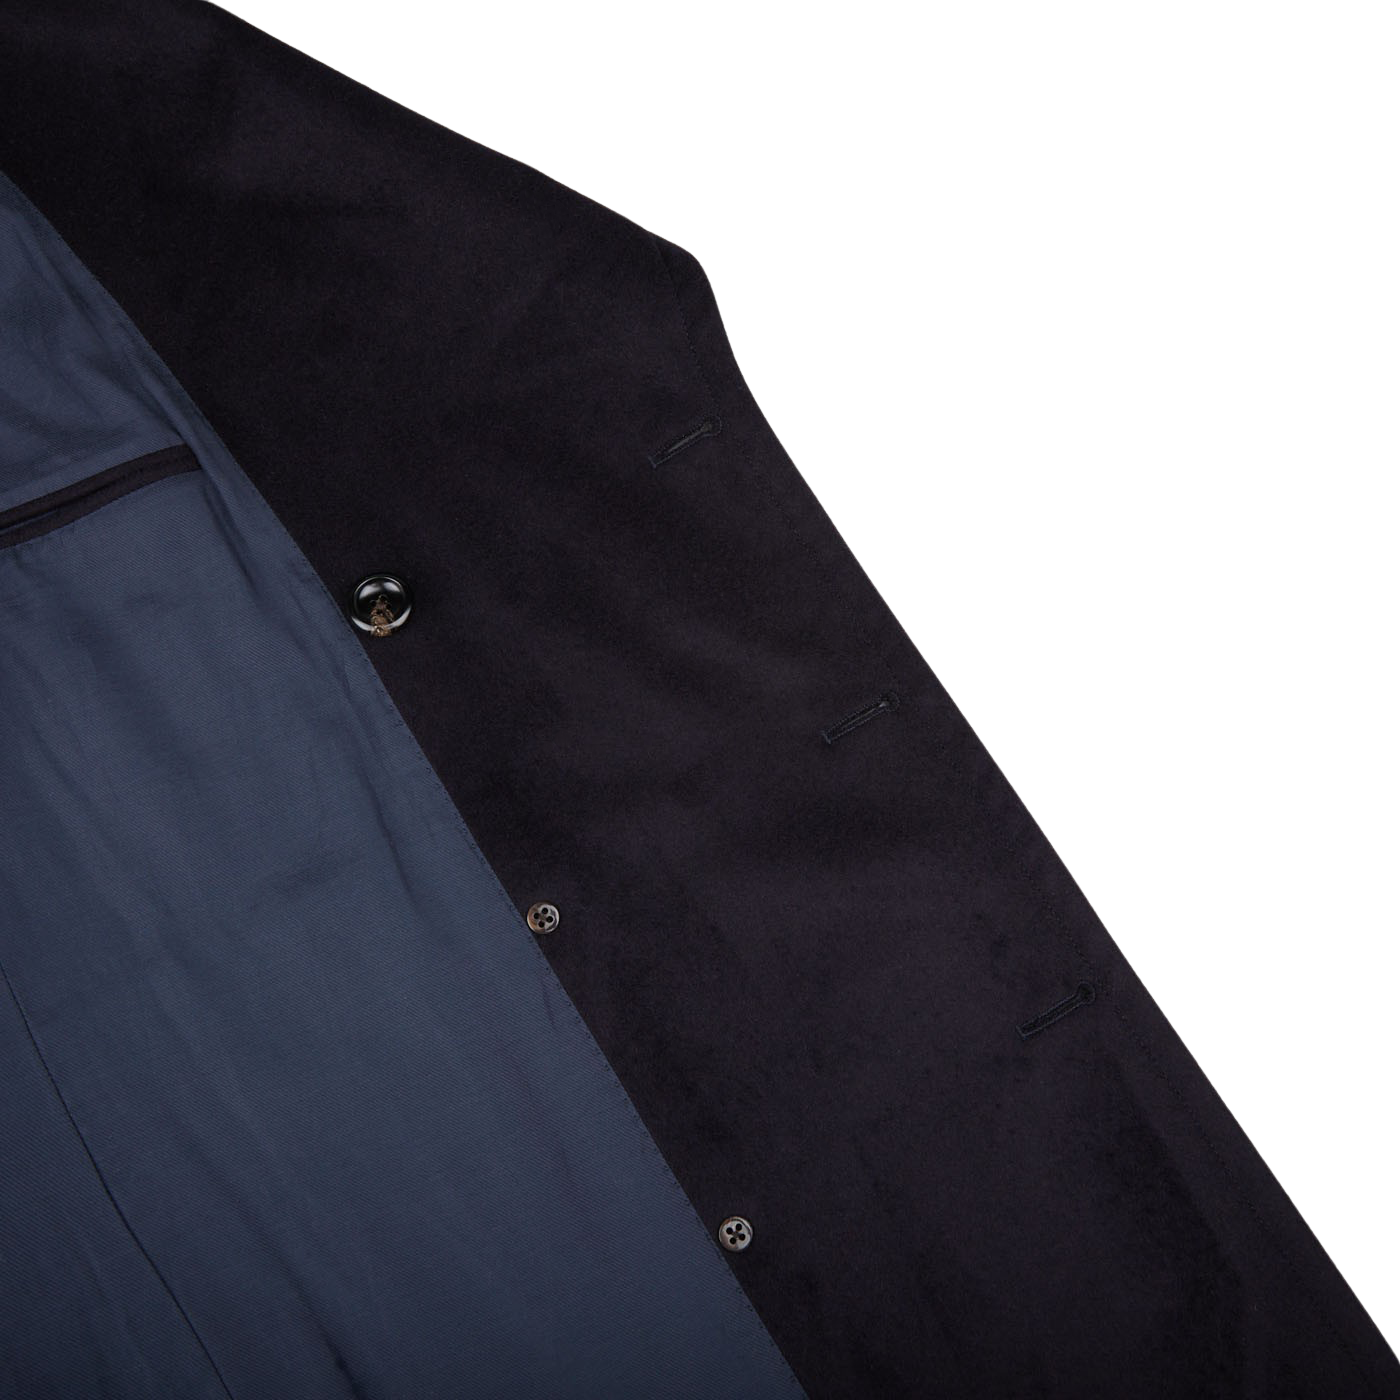 A close up of a Luigi Bianchi navy blue double-breasted Navy Blue Wool Cashmere Dream Polo Coat made of wool-cashmere.